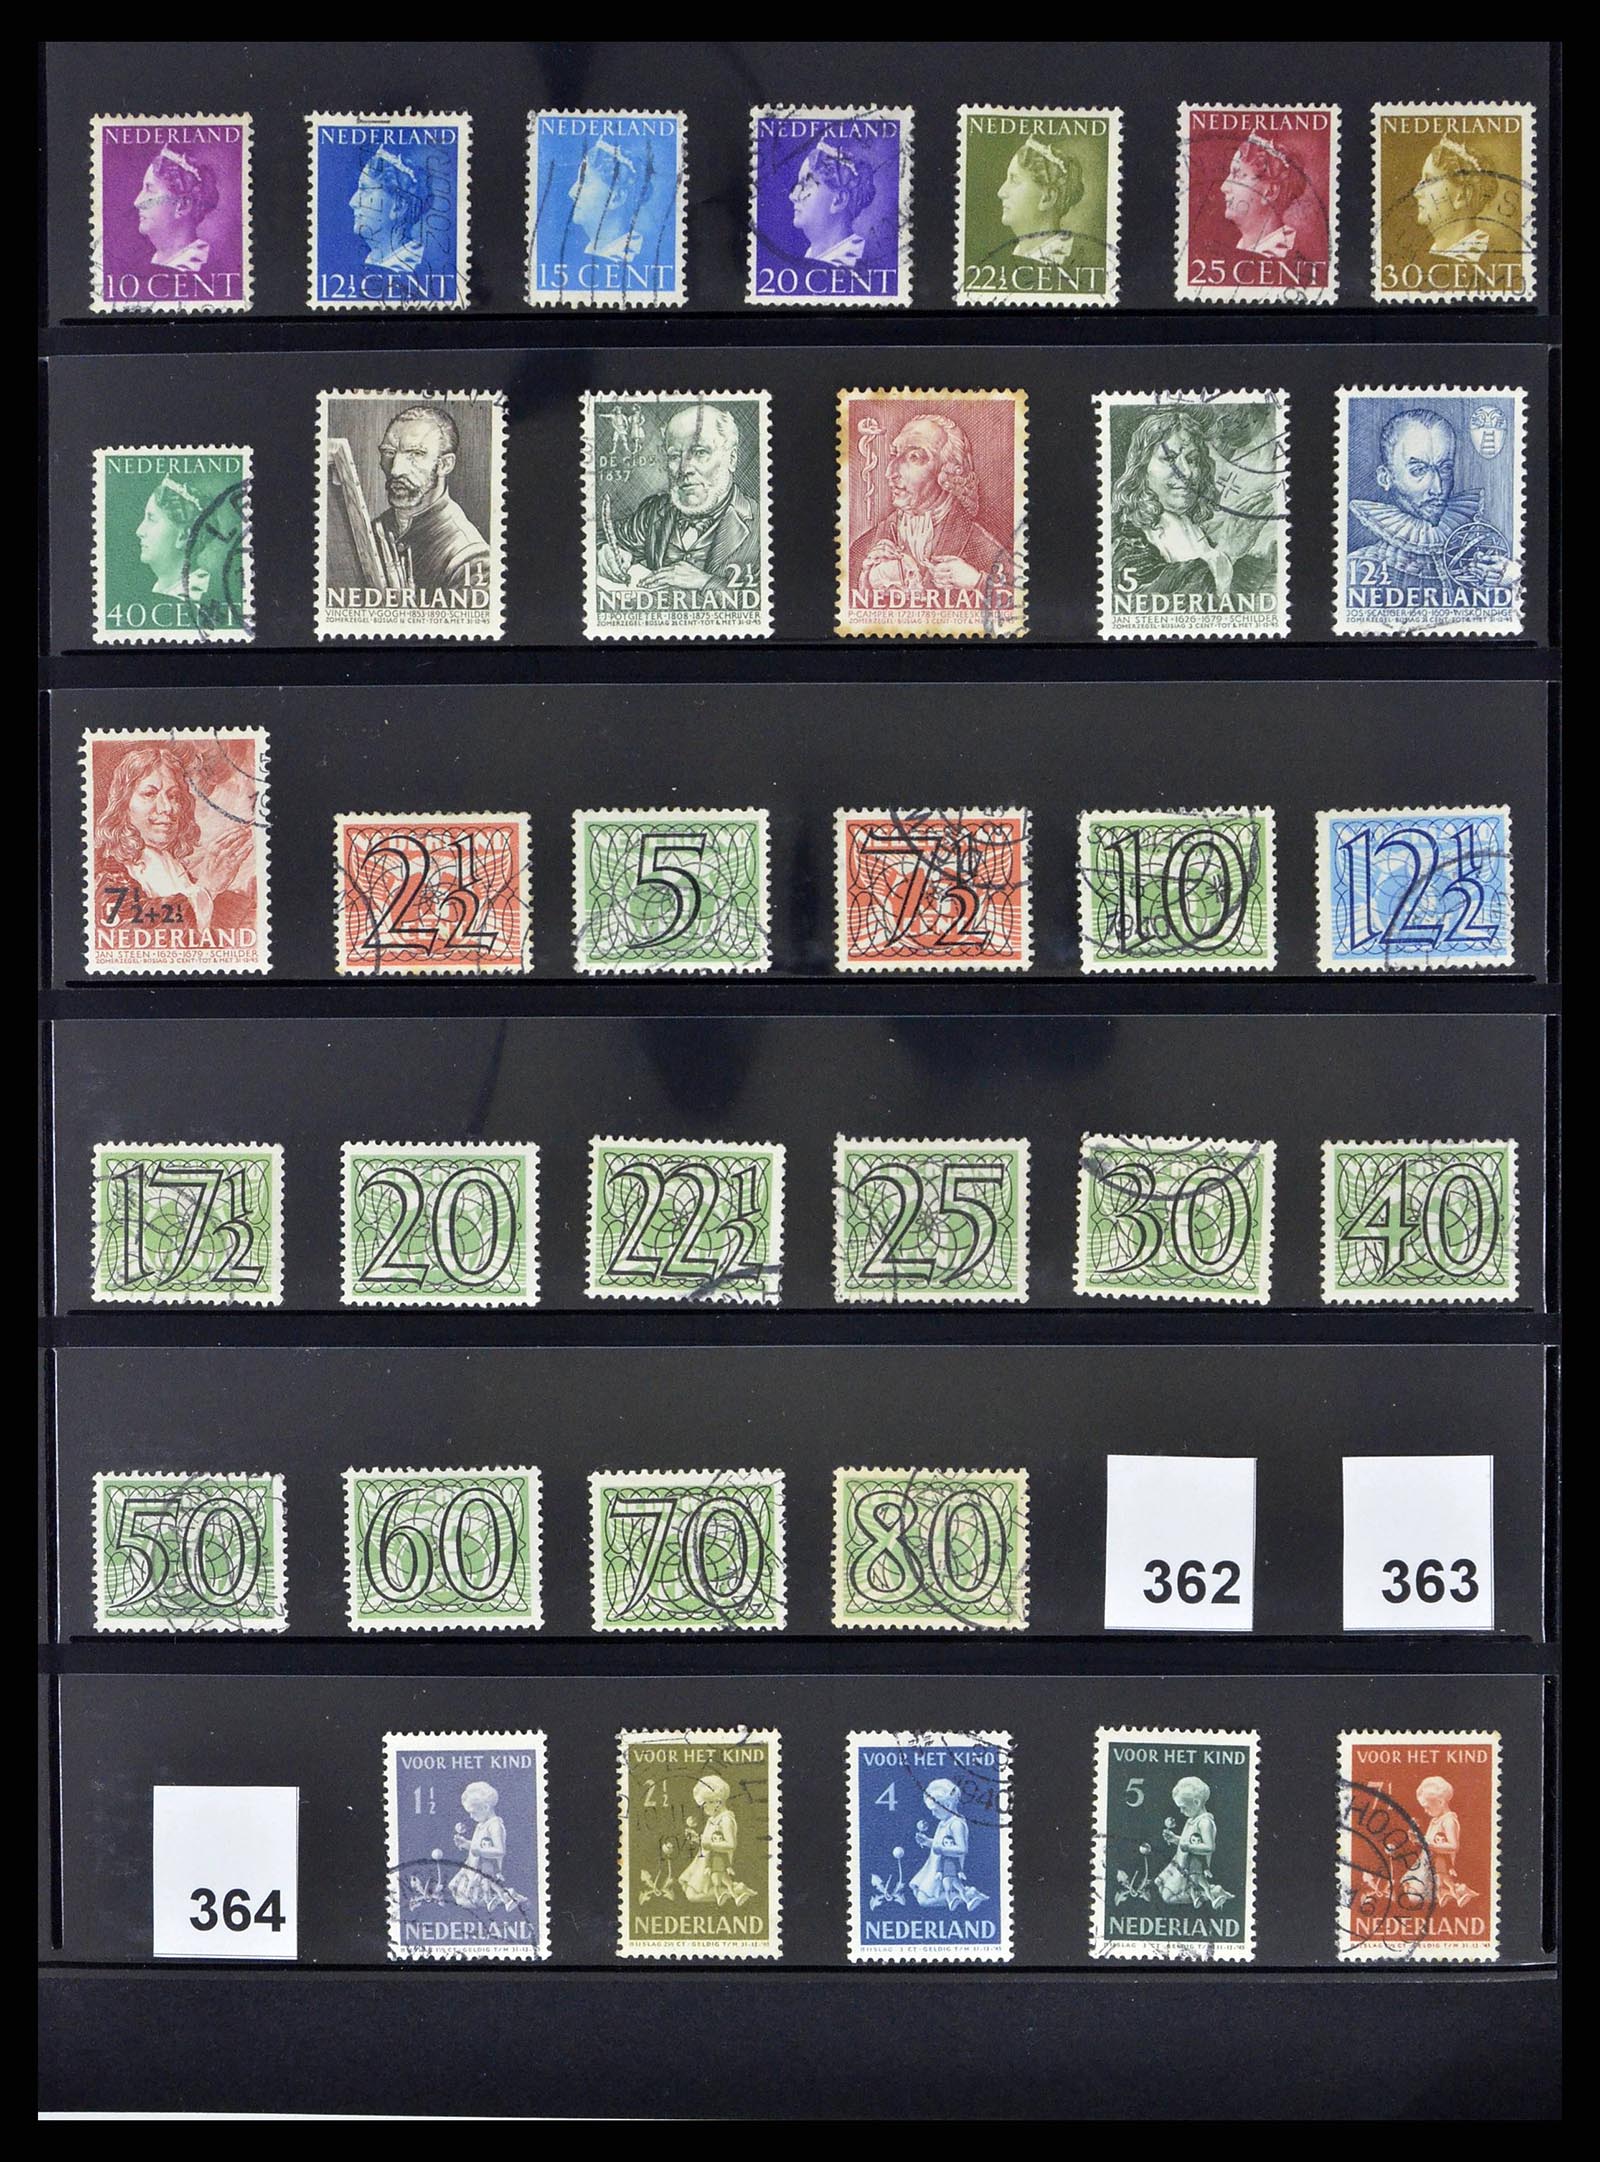 38791 0096 - Stamp collection 38791 Netherlands 1852-2014.